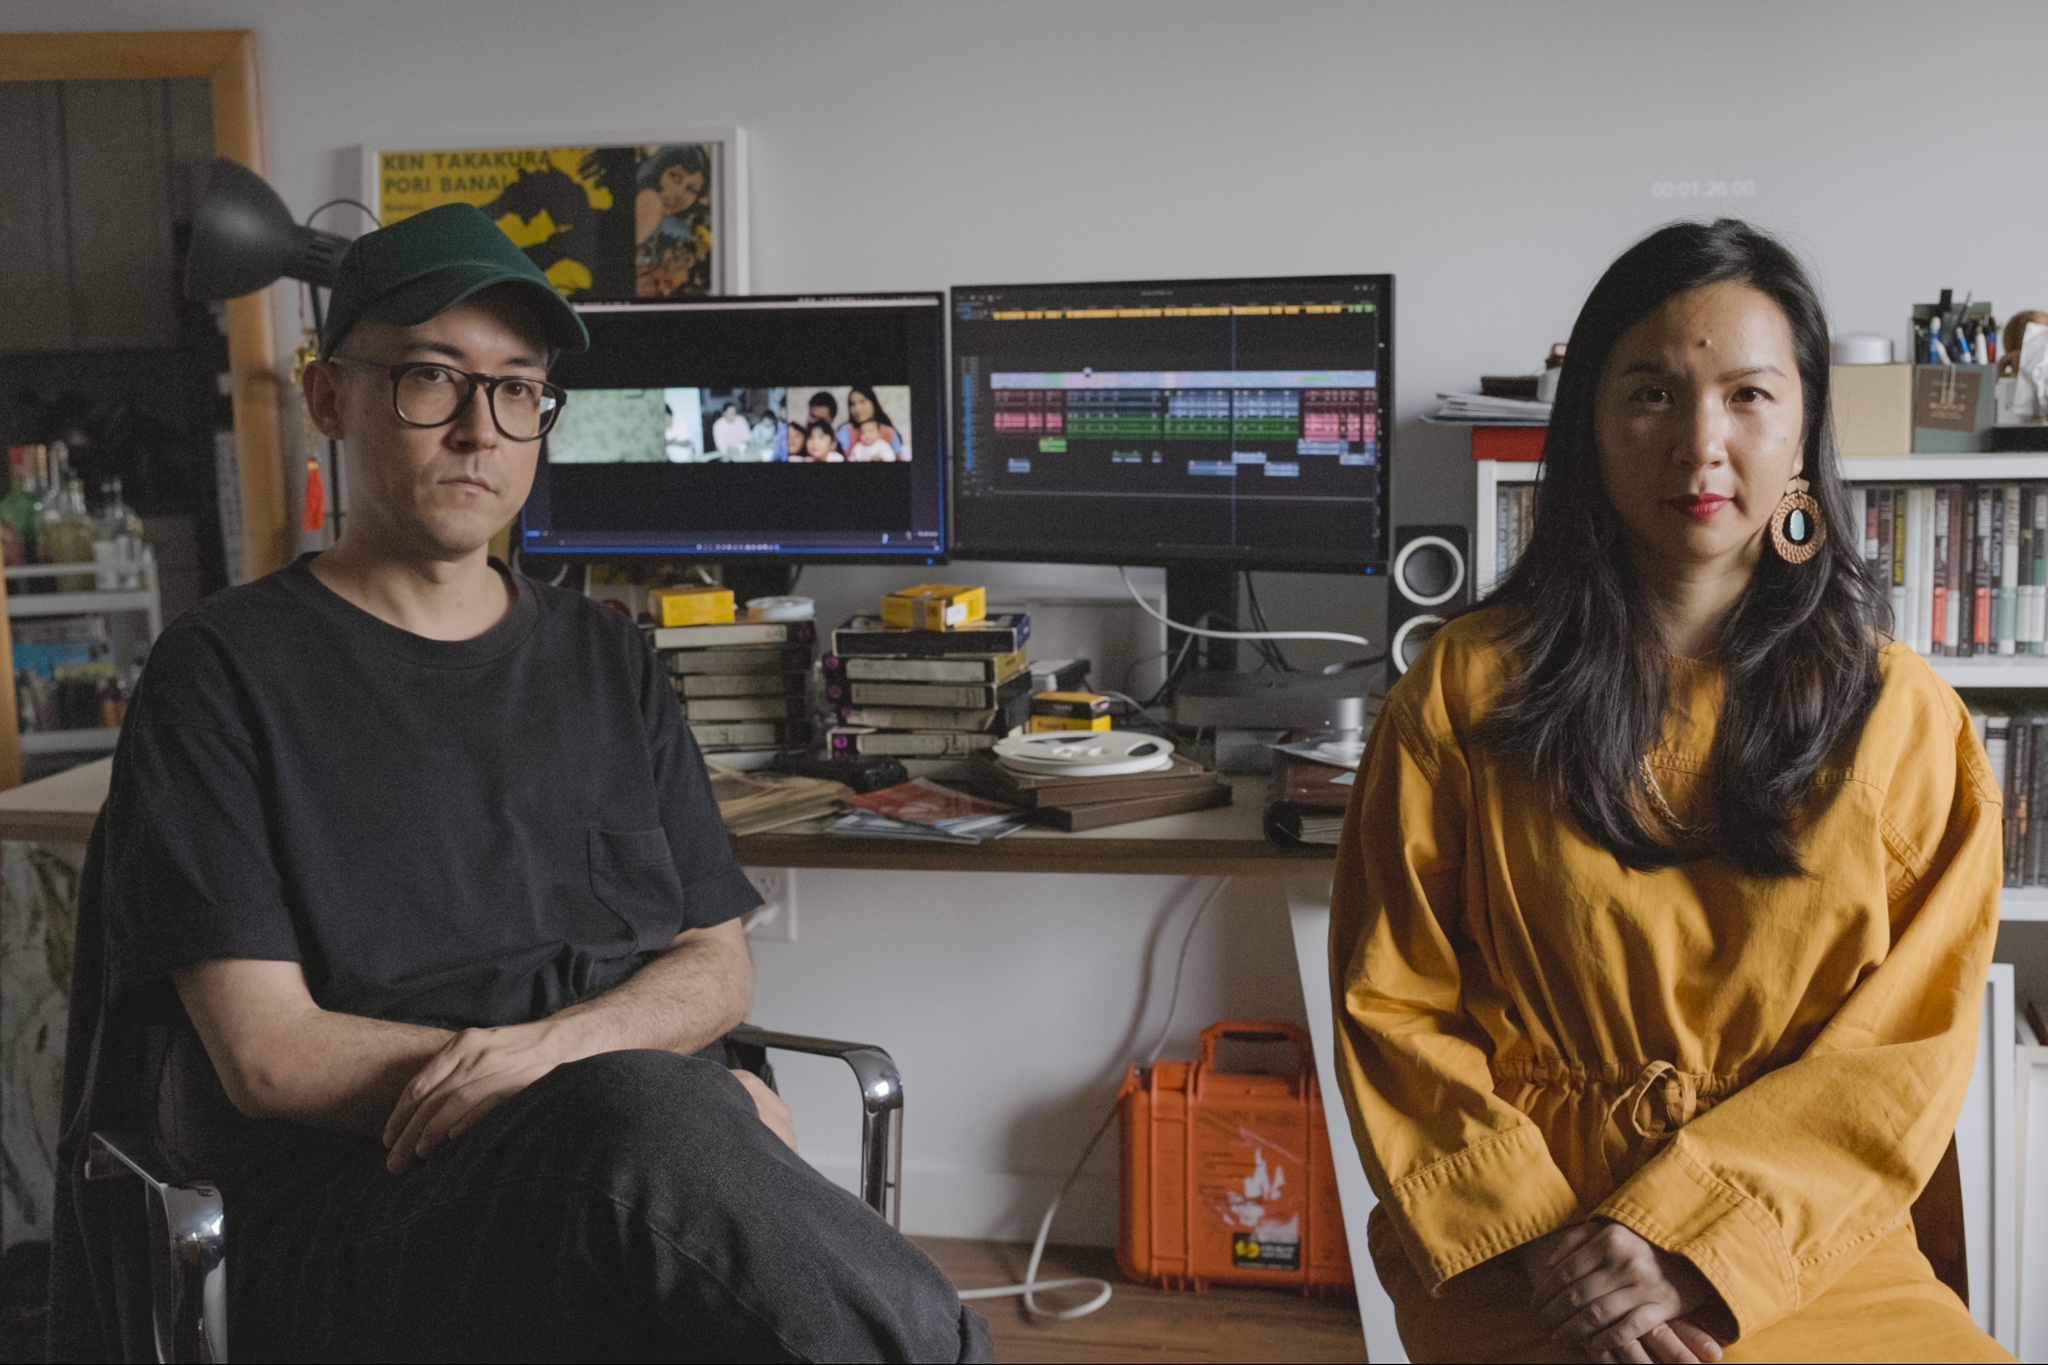 Artists Chritstopher Radcliff and Cathy Linh Che sit in front of a desk with two computer monitors. On one monitor is their film and on the other is the audio track for the film in an editing software program. On the desk are piled family photos and old VHS tapes from Che's family.